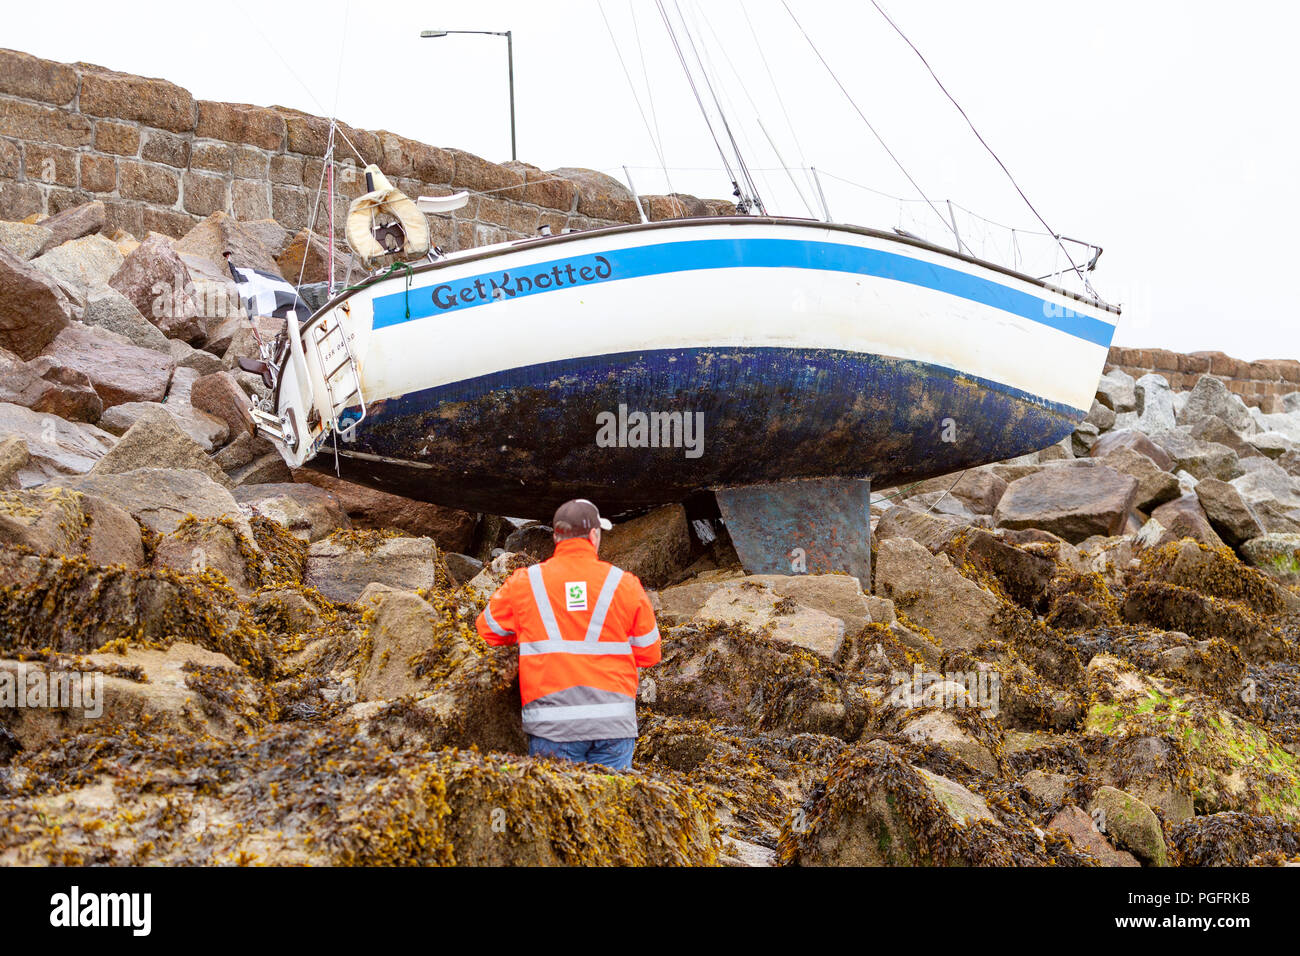 Penzance, Cornwall, UK. 26th August 2018. Man rescued by coastguard and RNLI as yacht is swept on to rocks in a storm.  Mike Newman/AlamyLiveNews Stock Photo